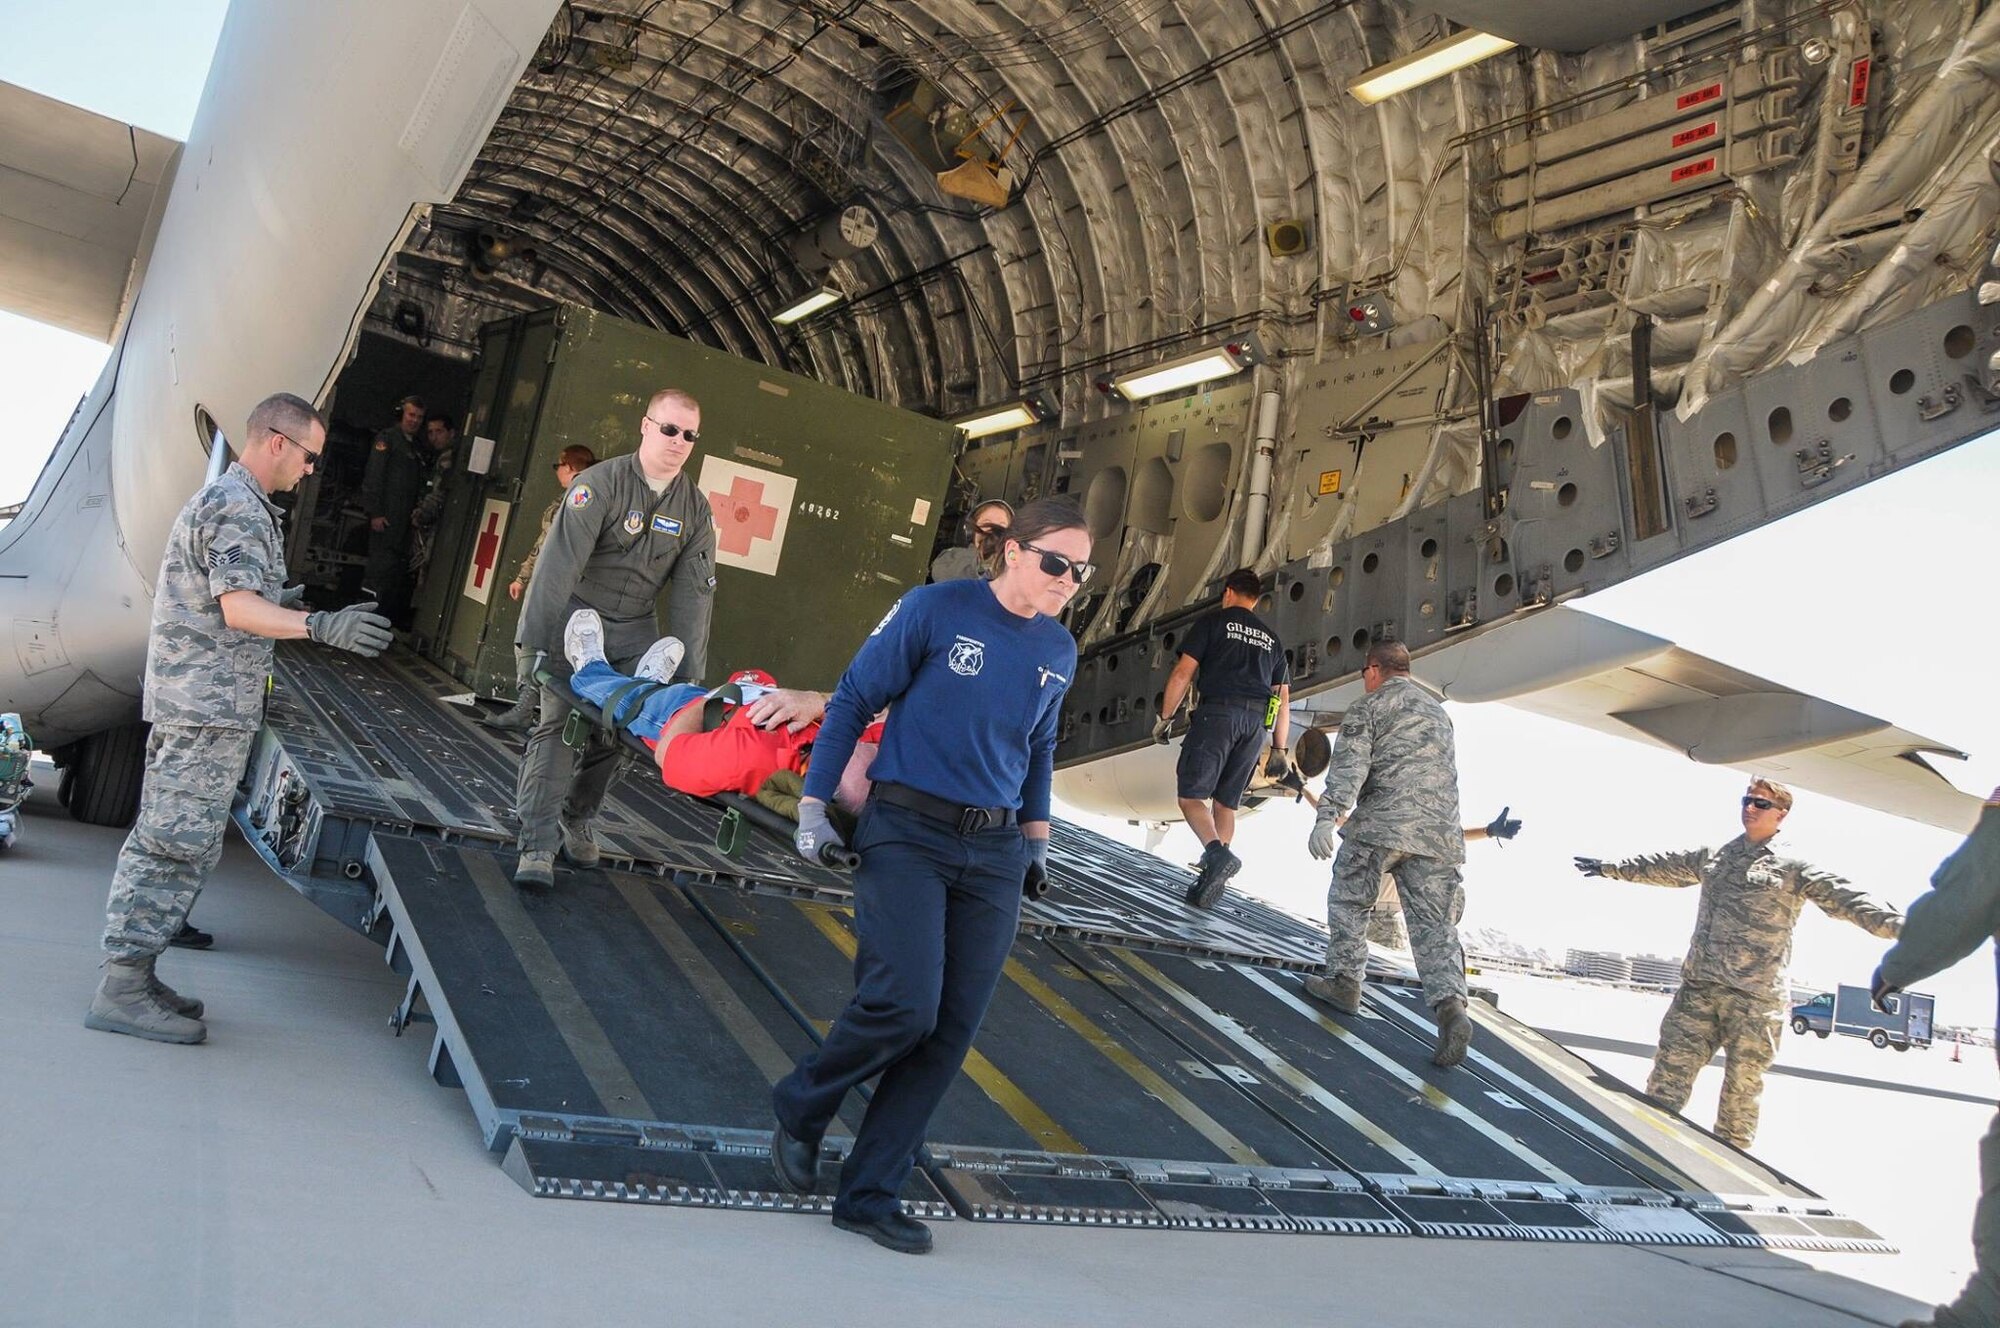 Reserve Citizen Airmen from Luke Air Force Base and Wright Patterson AFB work with local firefighters in transporting simulated patients during a National Disaster Mass Casualty exercise at the 161st Air Refueling Wing at Phoenix Sky Harbor.